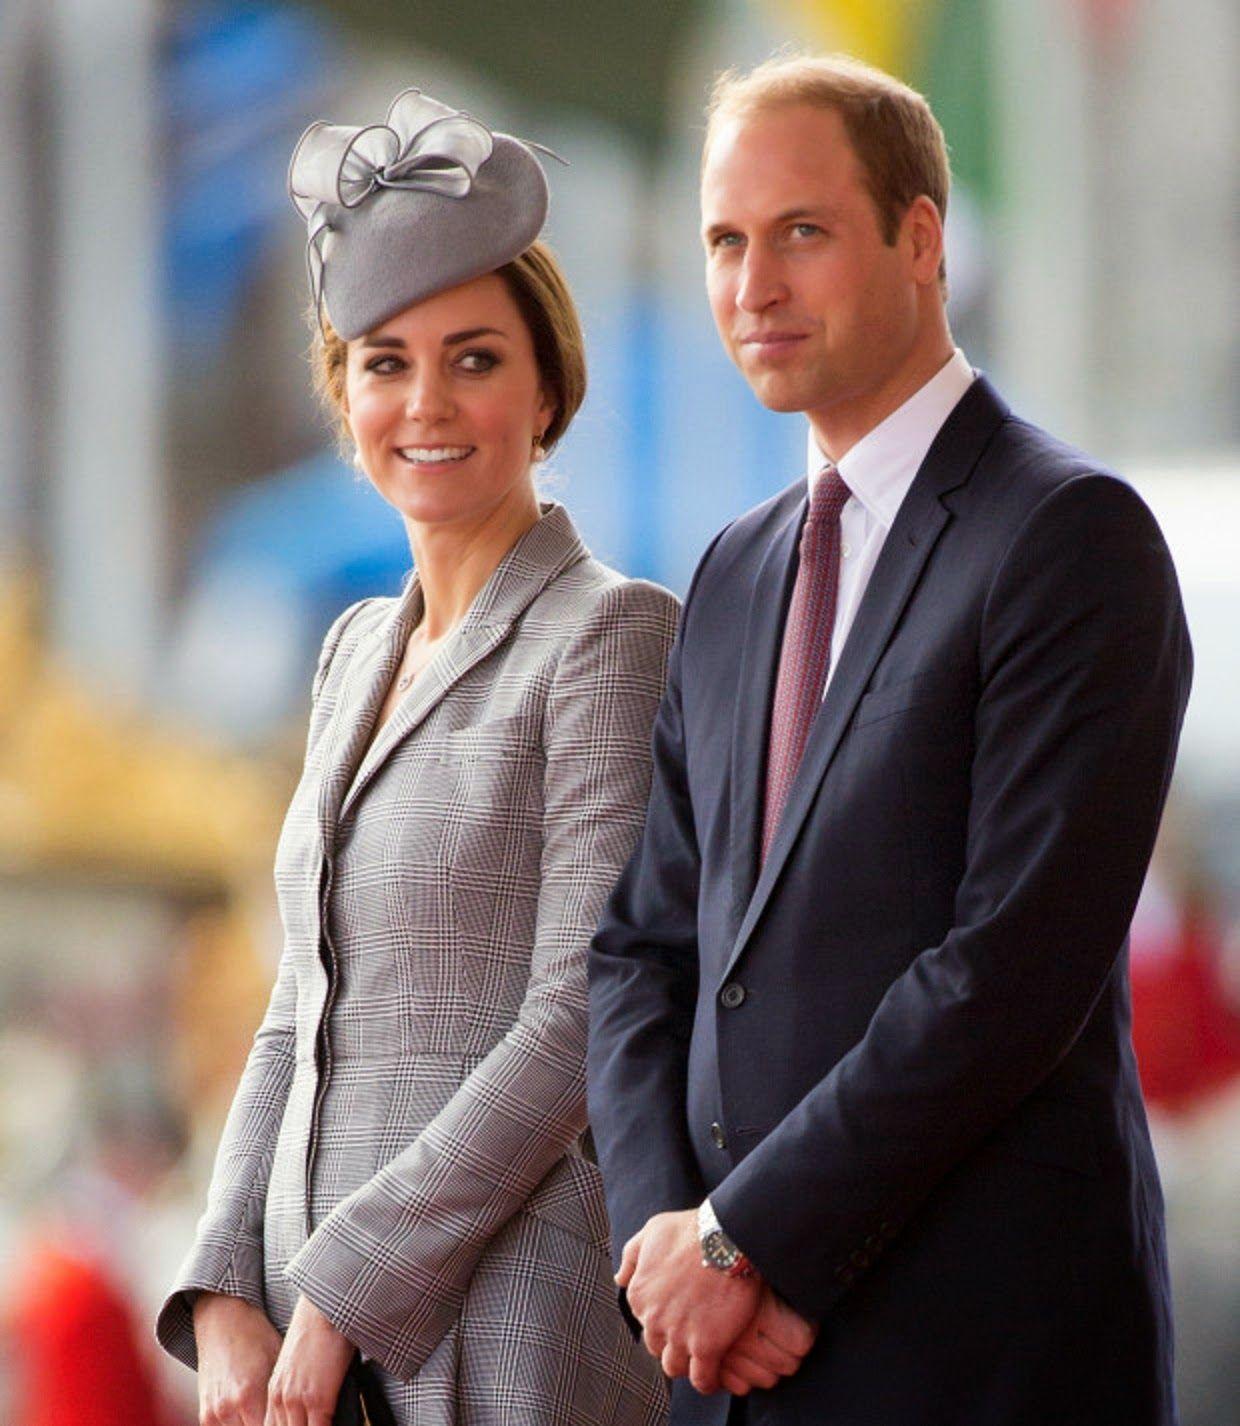 Kate Middleton & Prince William Wallpaper Download. Every Couples